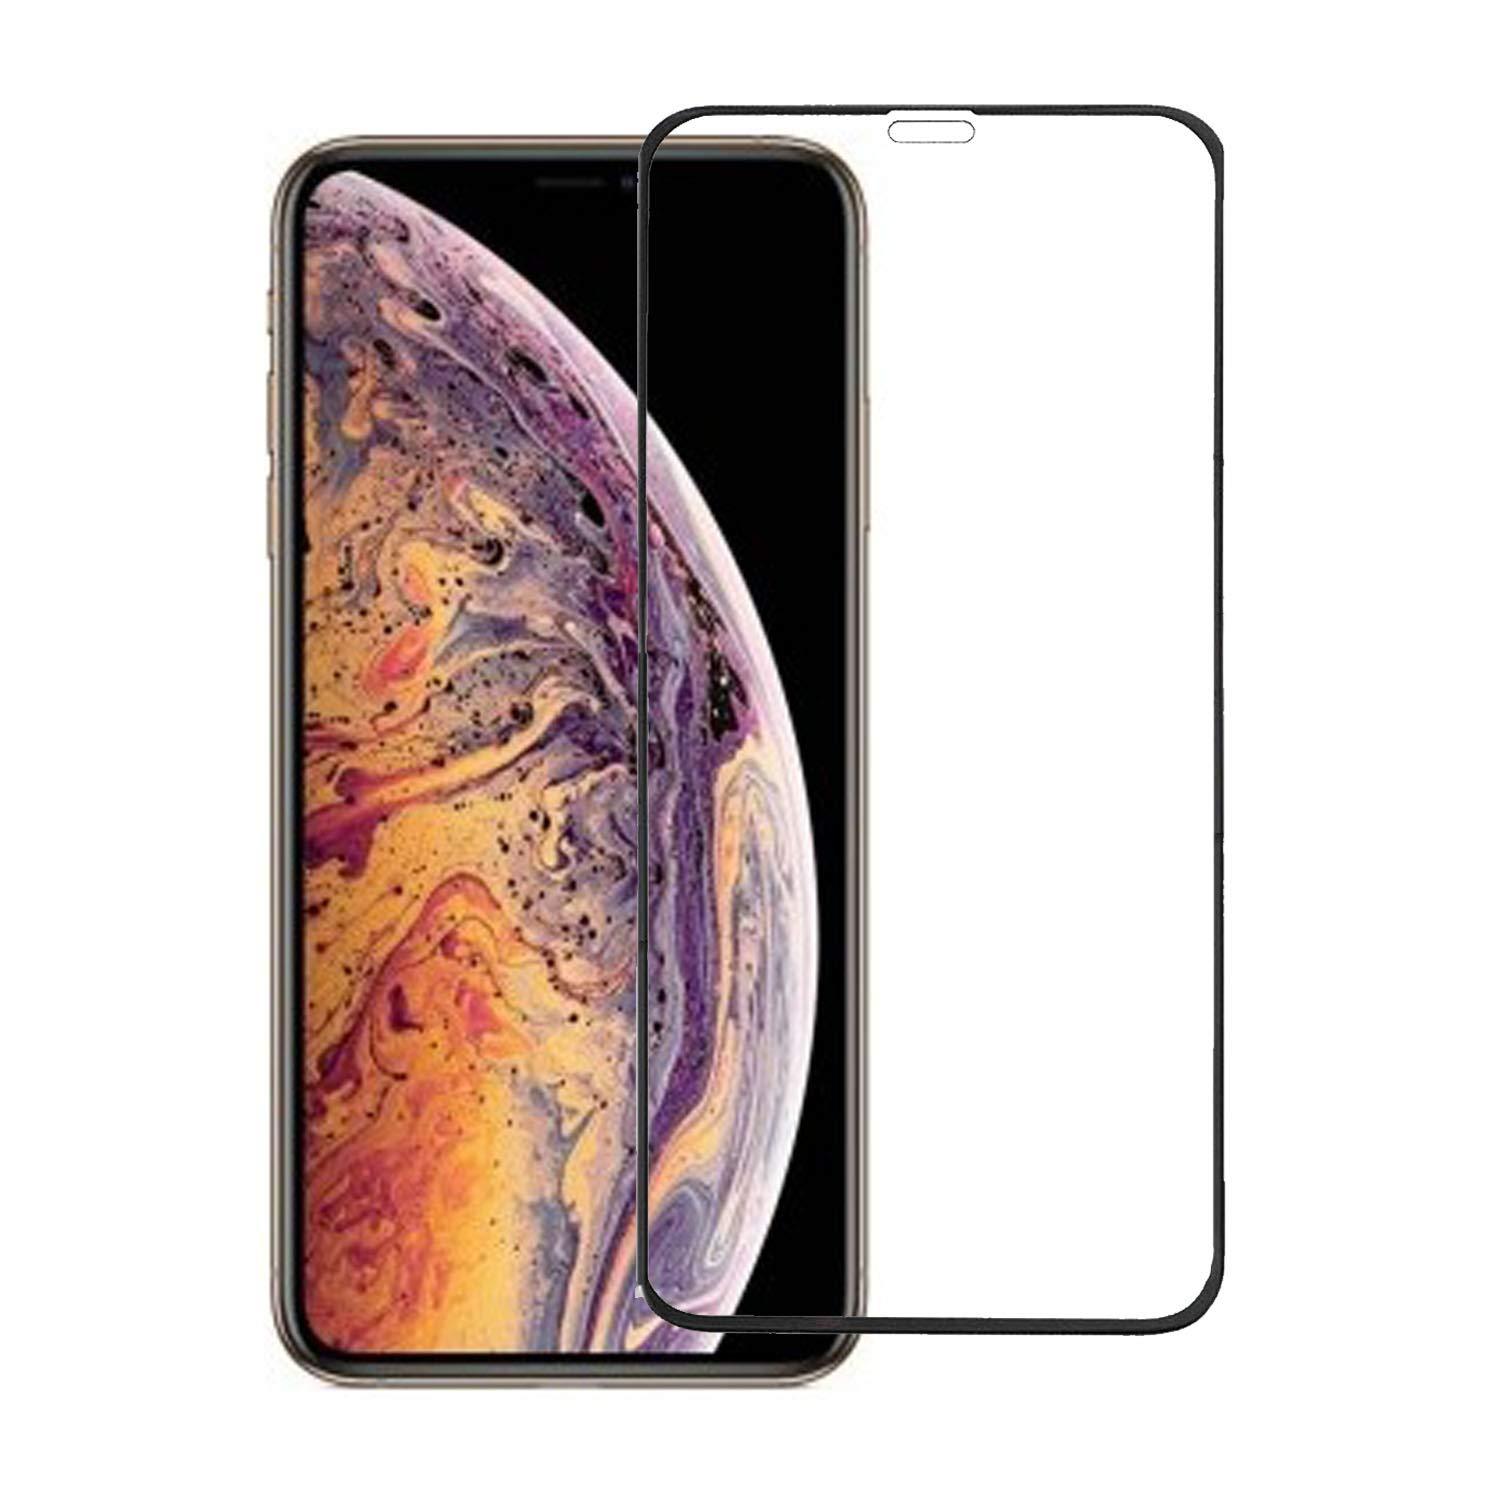 CEDO Tempered Glass Defense Lightweight Made for Apple iPhone Xs Max Edge toEdge - $12.35